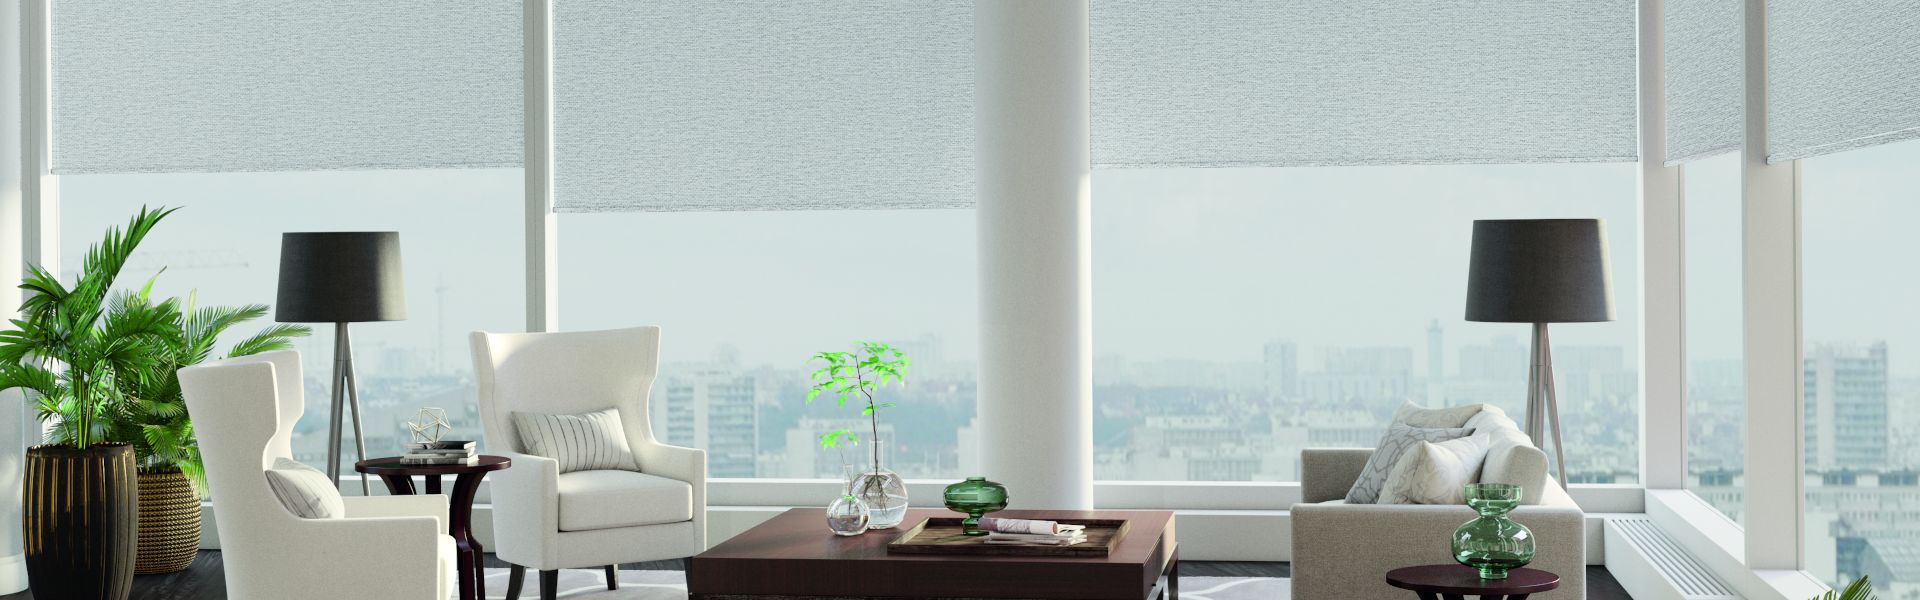 The perfect window coverings for your home or office